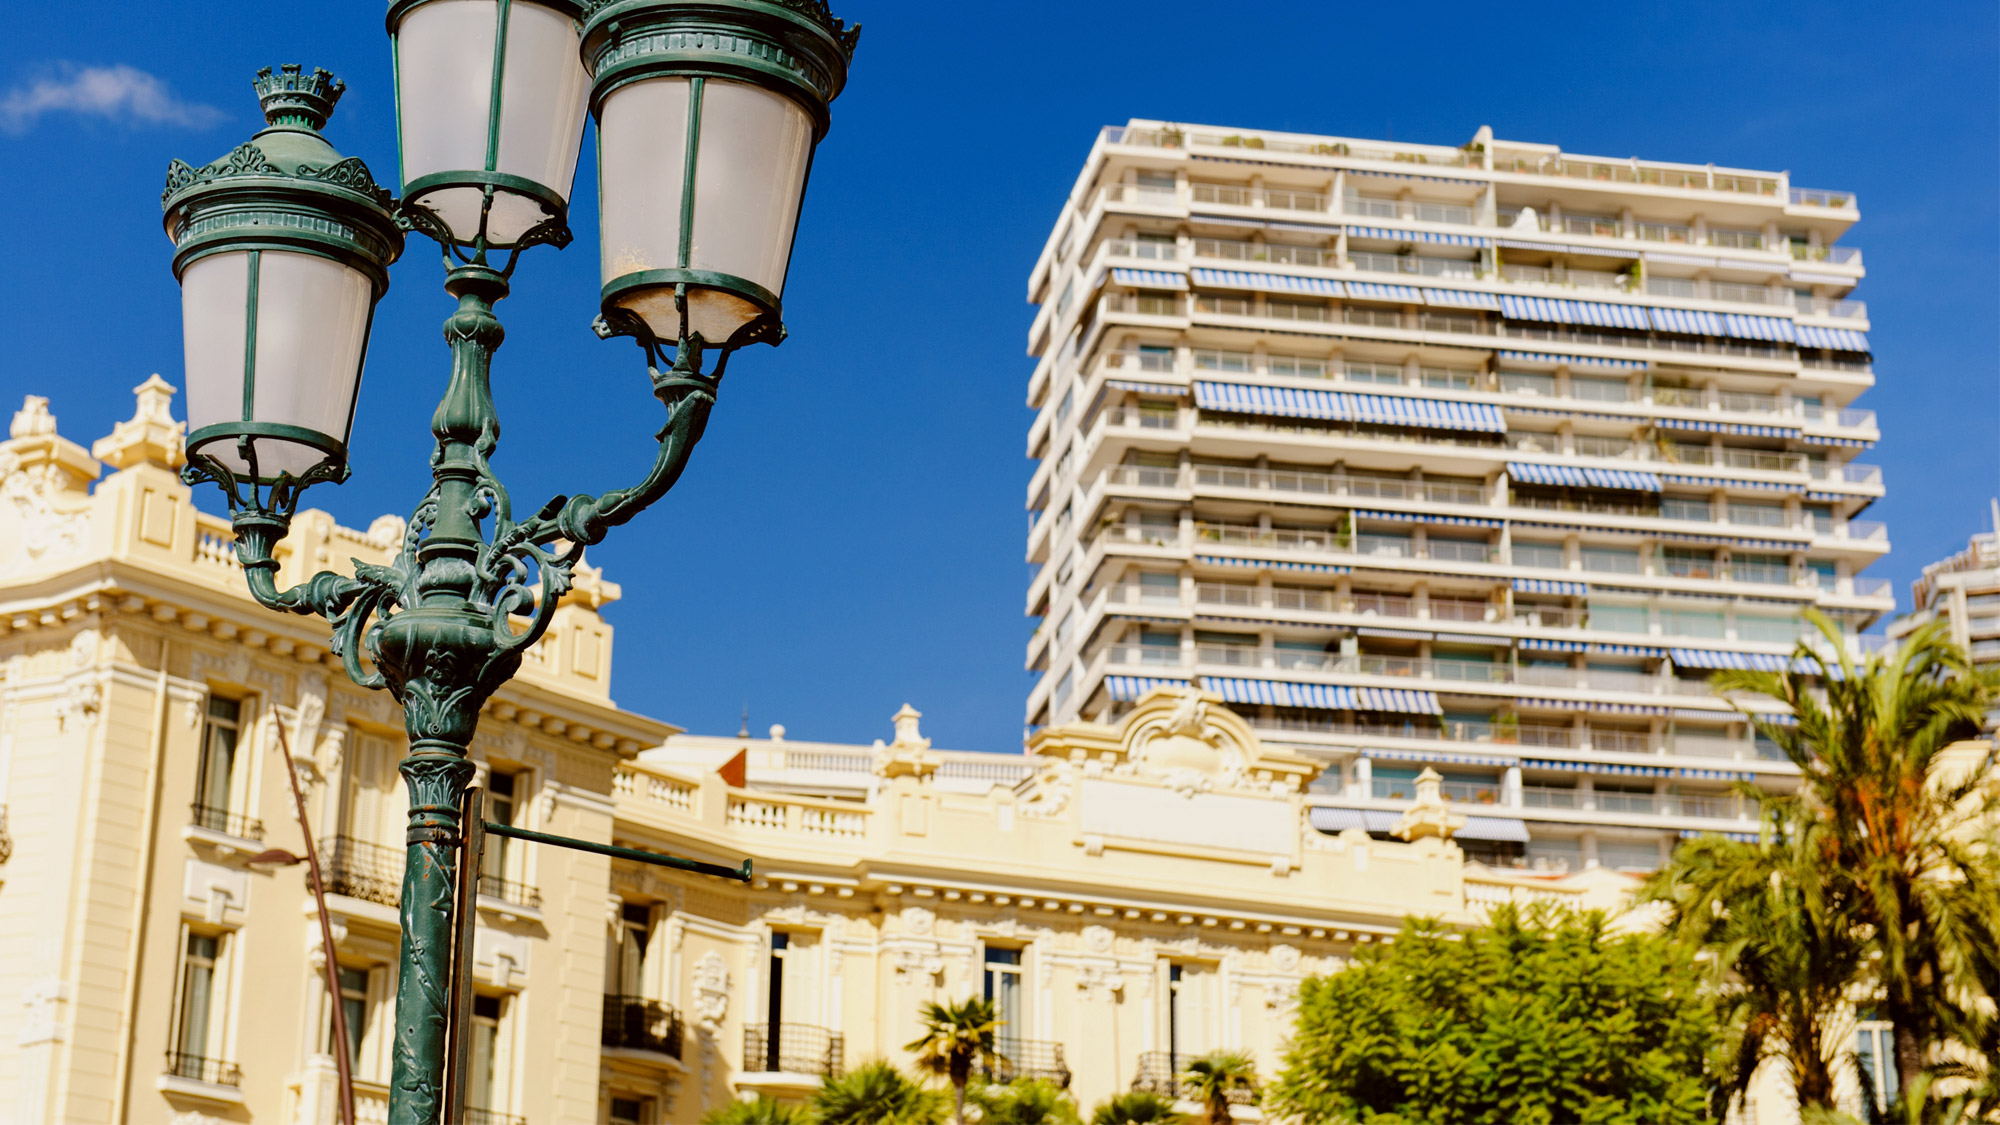 Property management in Monaco contrasts with belle epoque and modern styles 